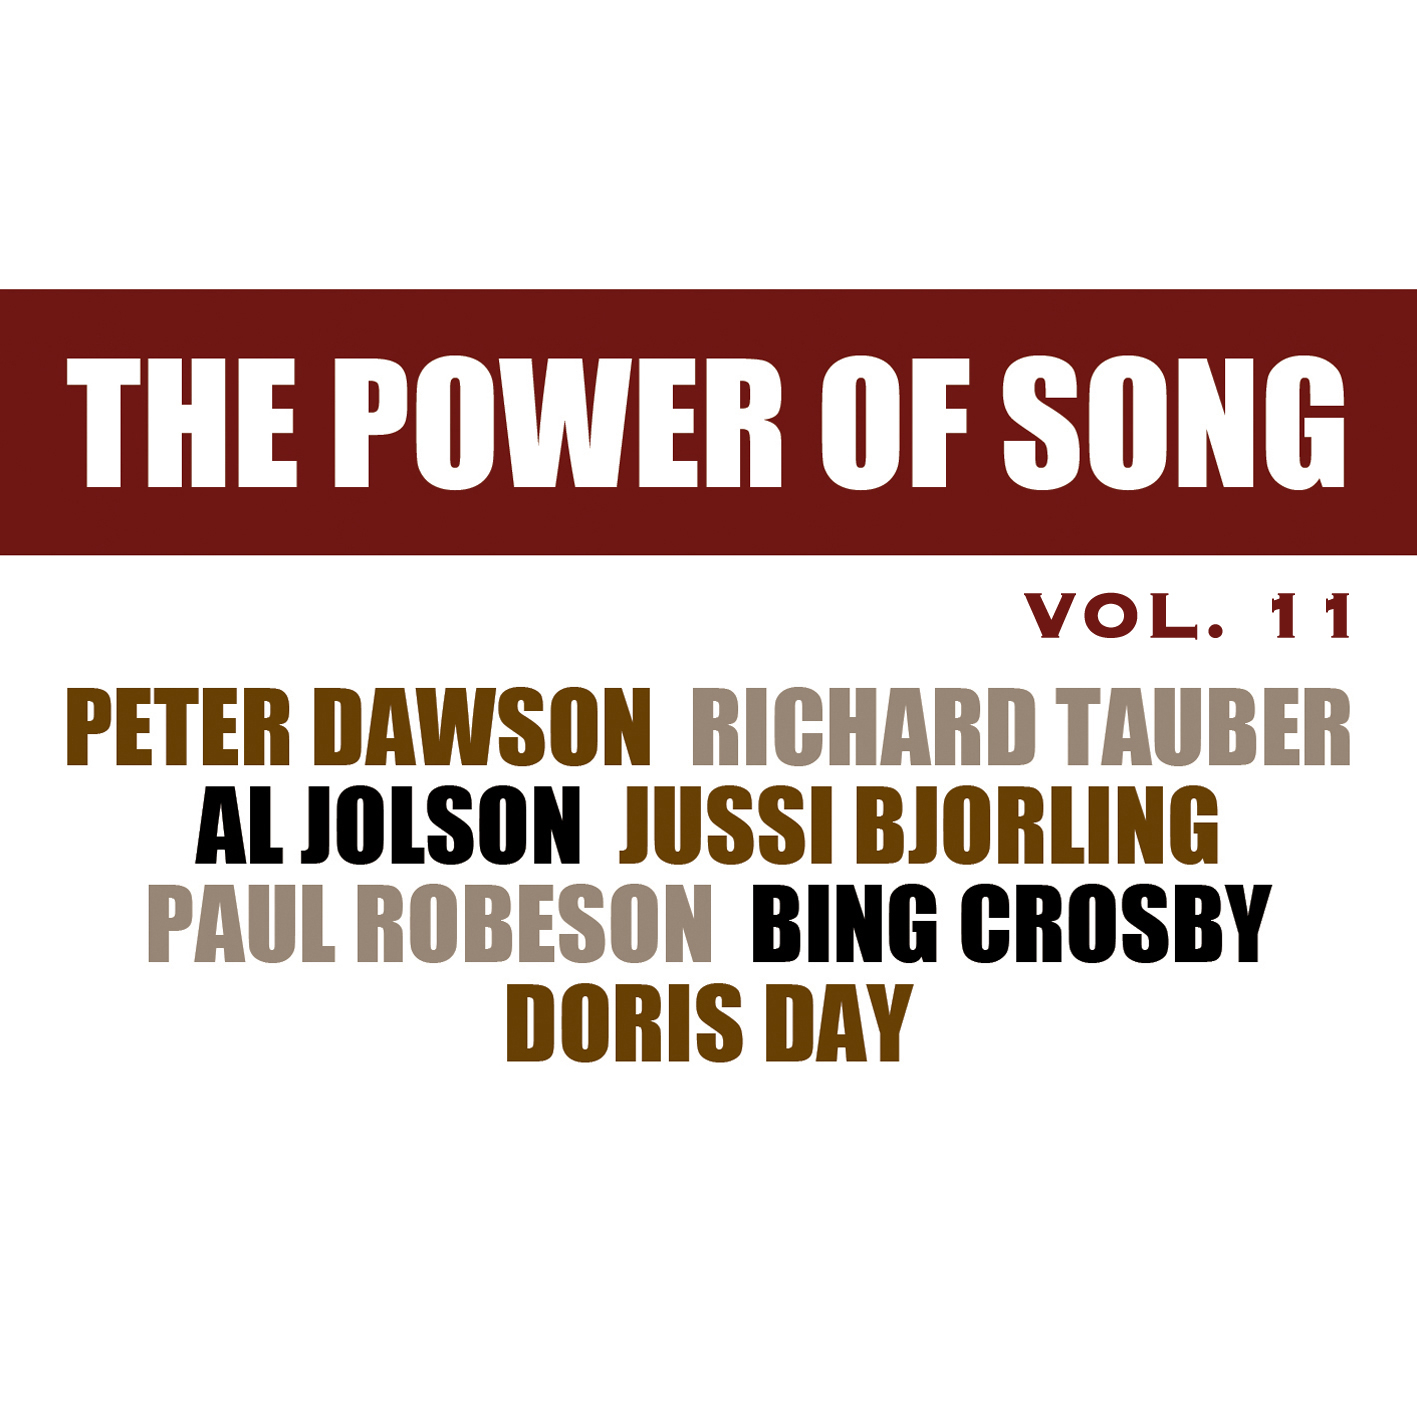 The Power of Song Vol. 11